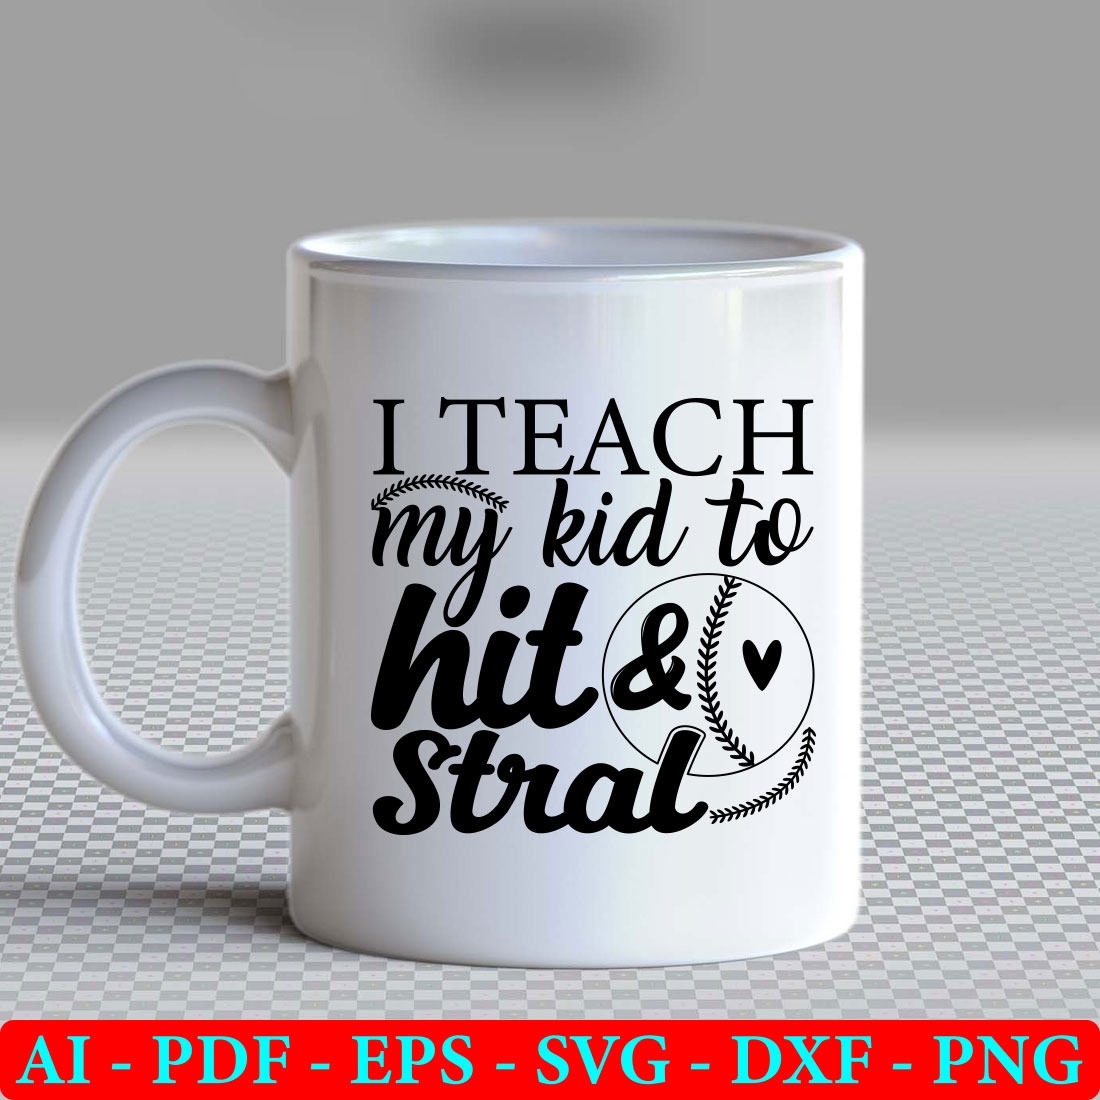 White coffee mug with the words teach my kid to hit and steal.